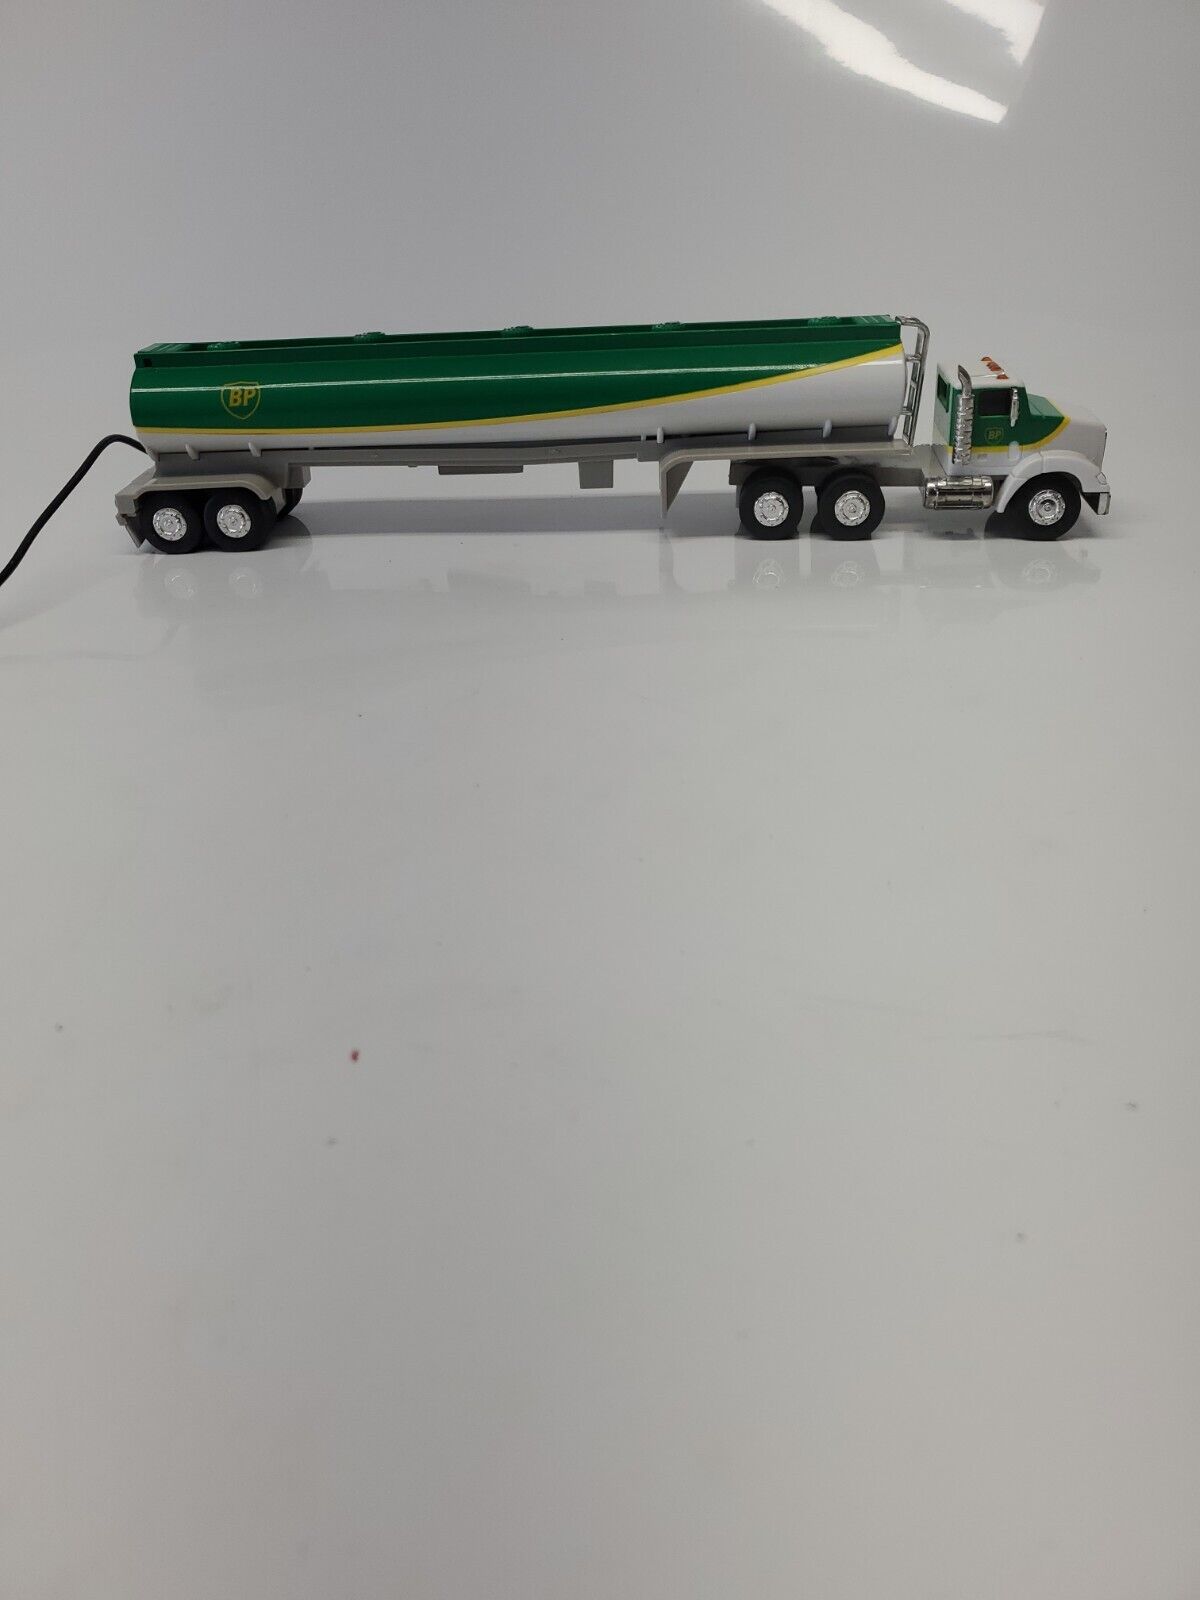 1992 Limited Edition BP Toy Tanker Truck With Wired Remote Control *WORKS*